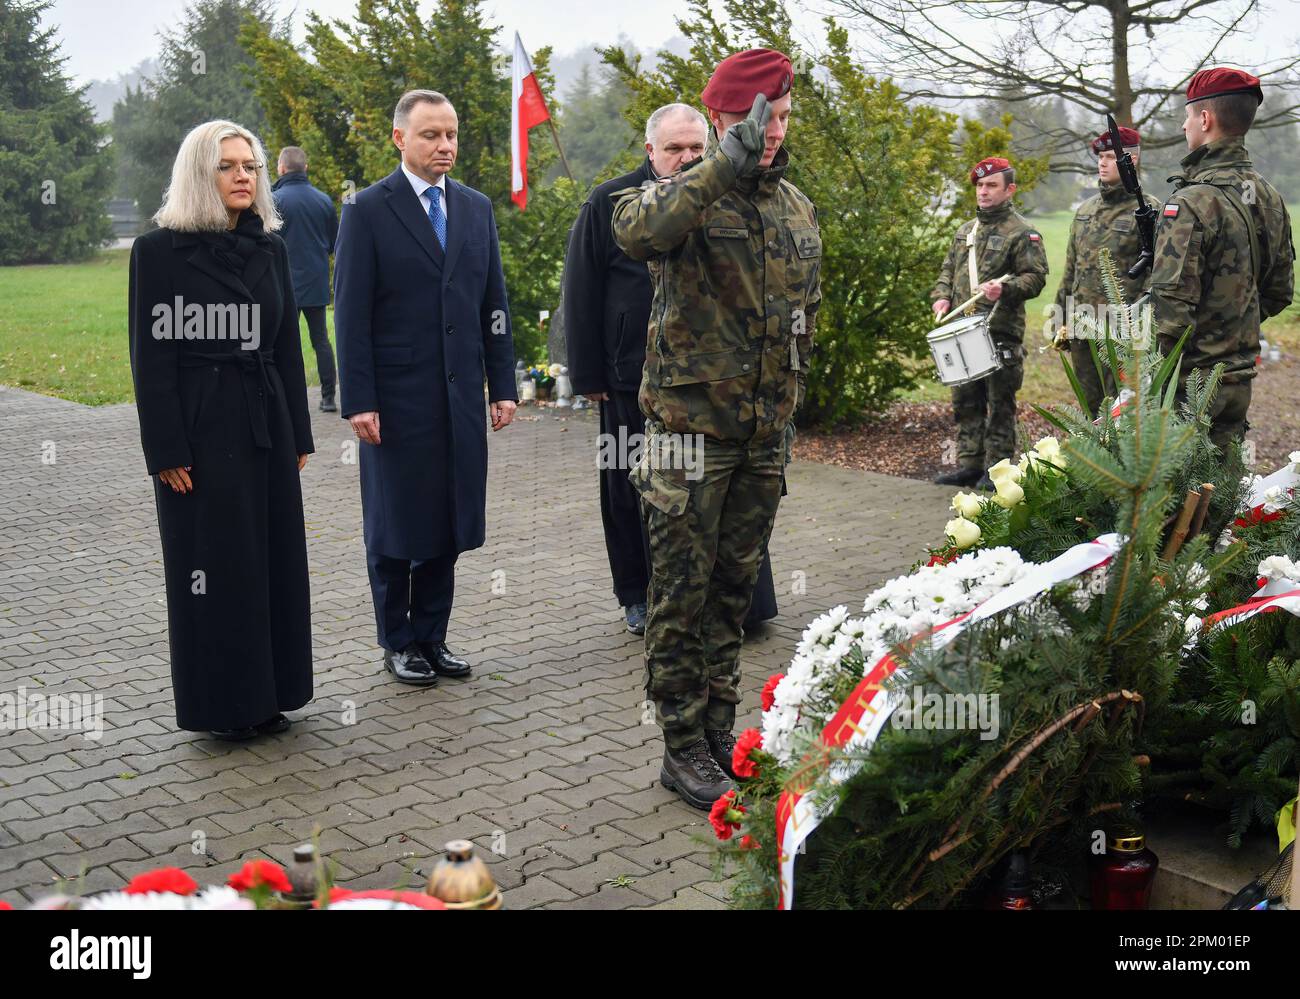 Malgorzata Wassermann (daughter of Zbigniew Wassermann) and the President of Poland Andrzej Duda seen at the grave of Zbigniew Wassermann, during the 13th anniversary Cemetery of his death in Bielany, Krakow. President Andrzej Duda attends the 13th anniversary of the government plane (TU154M) crash in Smolensk. The delegation led by President Lech Kaczynski died on the way to the ceremony in Katyn on April 10, 2010. 96 people were killed, including the President of the Republic of Poland Lech Kaczynski, and his wife, MPs, ministers, senators, military commanders, and others. Stock Photo